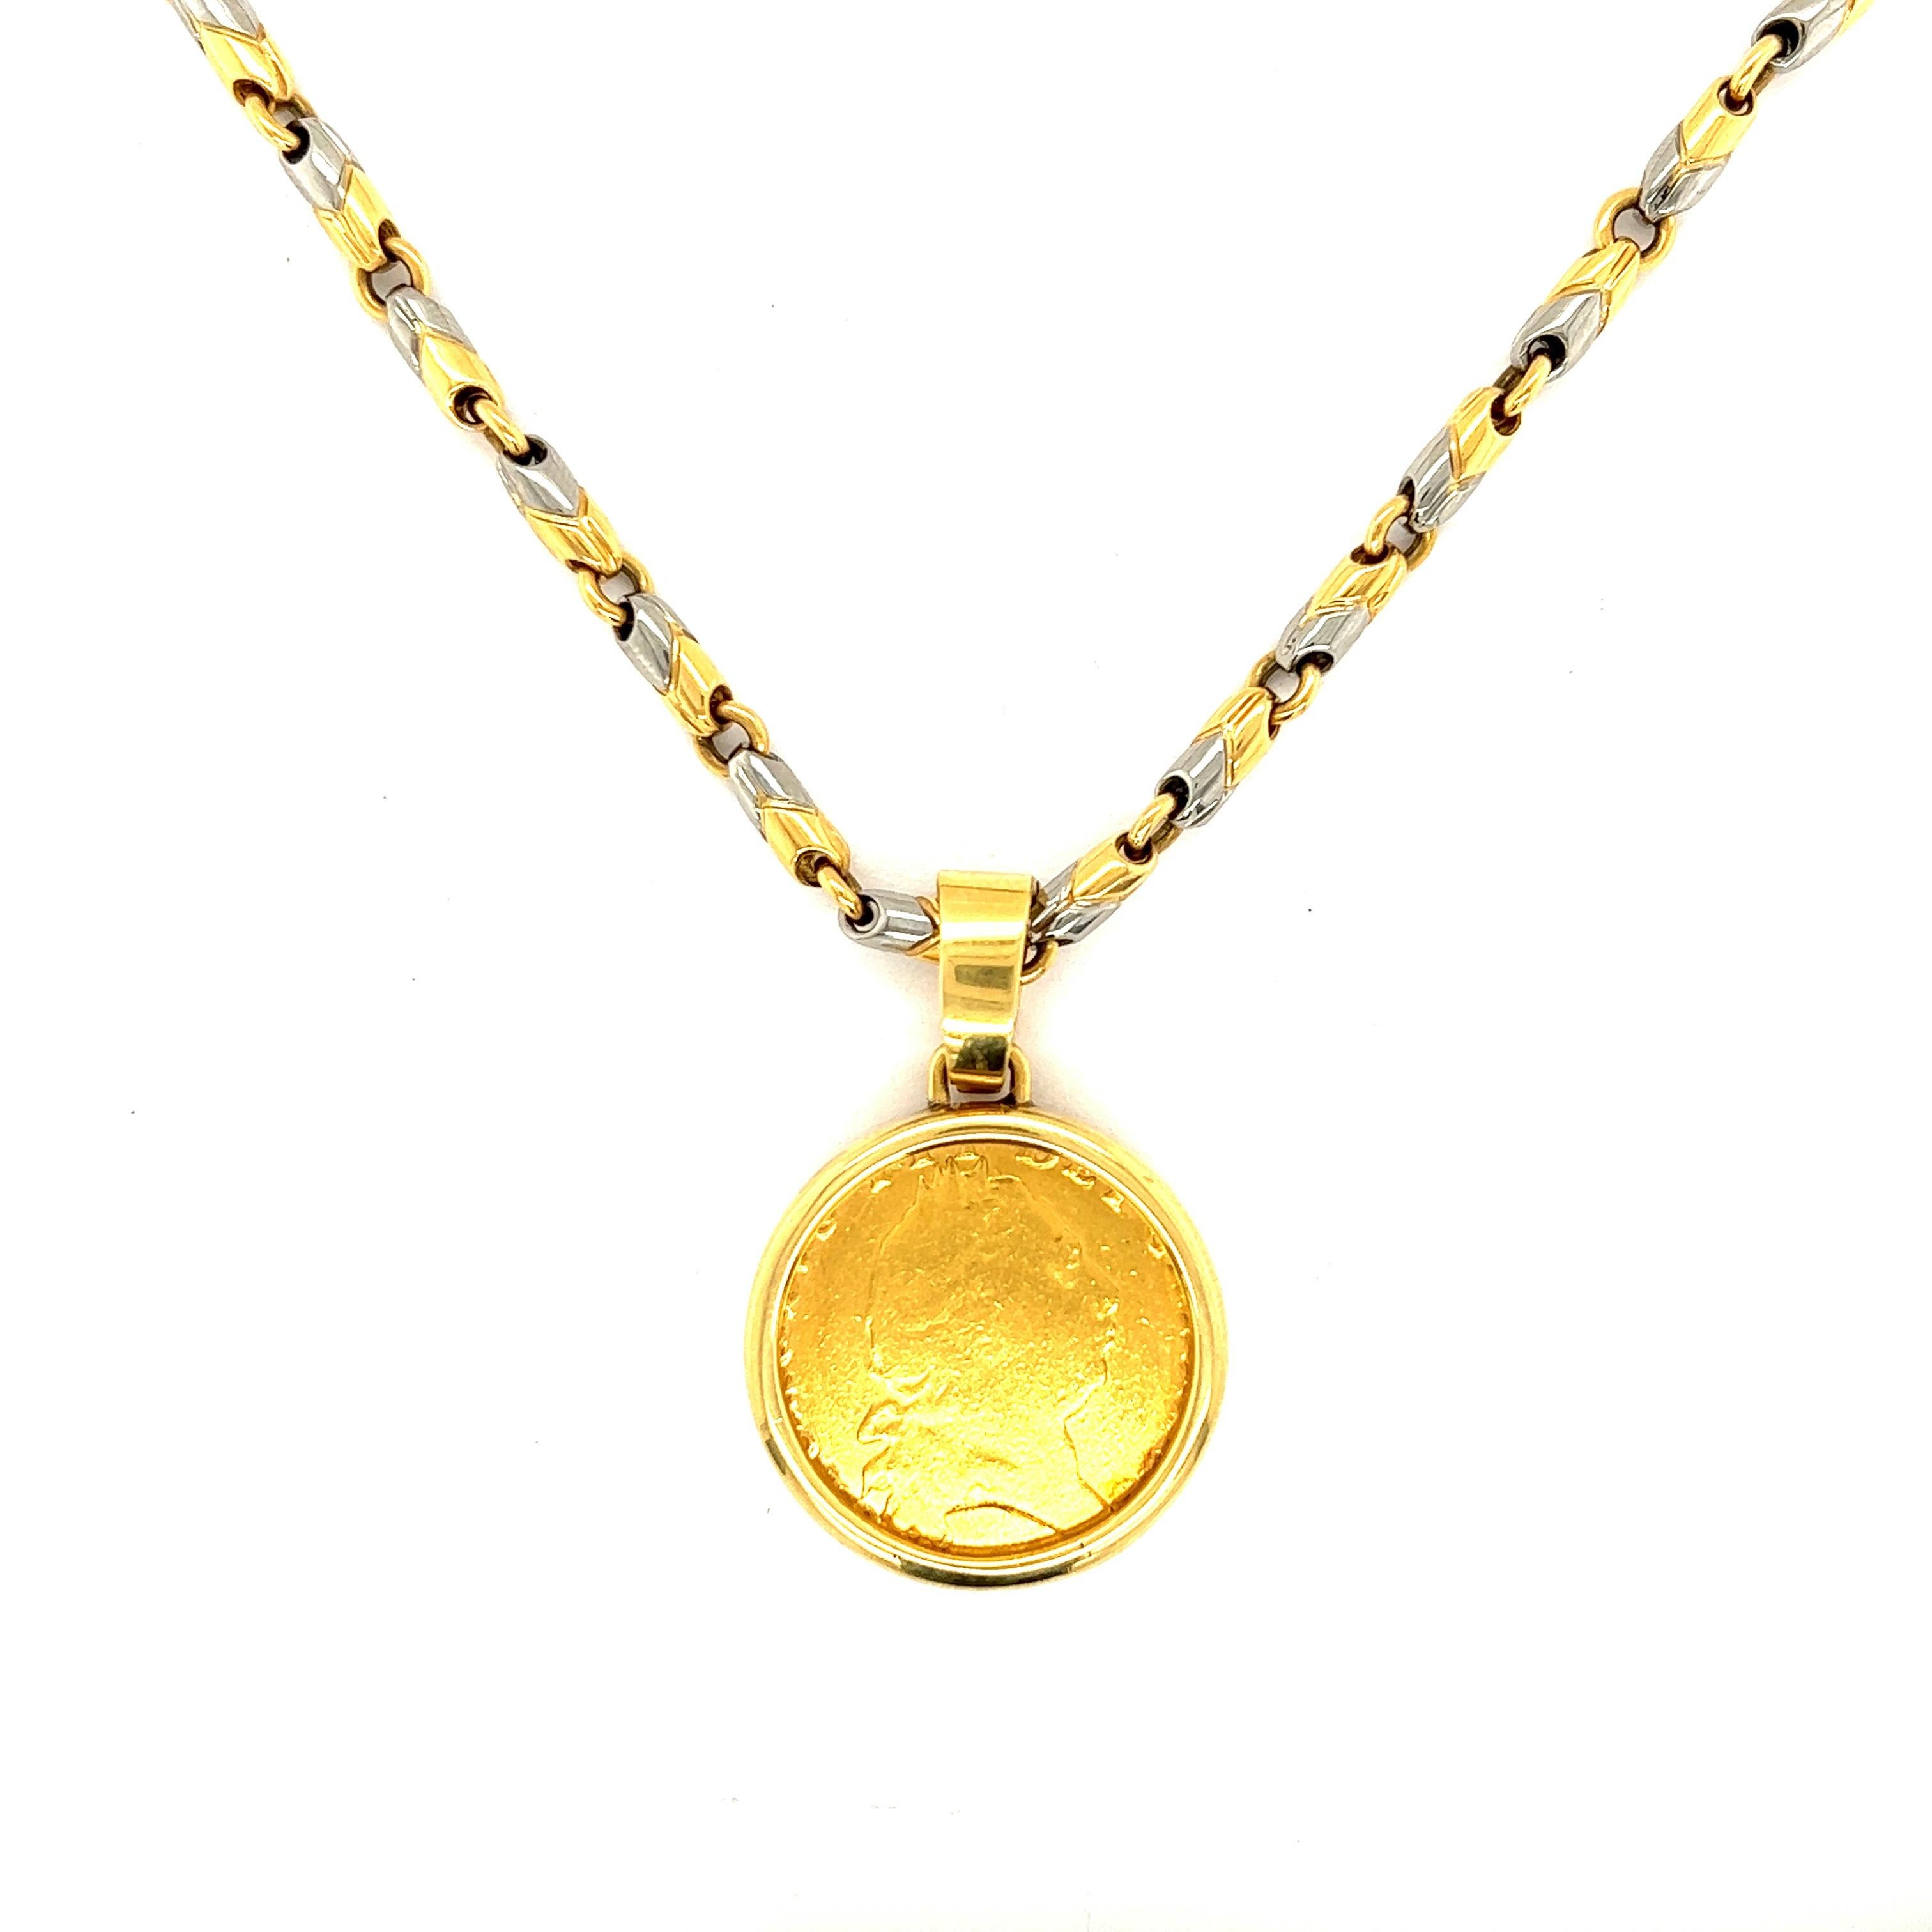 Bvlgari Monete Gold Coin Pendant with Gold & Steel Necklace

Gold coin set in a gold bezel pendant and a chain that's made of stainless steel and 18 karat yellow gold; marked Bvlgari N.Y. (bezel); Bvlgari, Gold and Steel (chain); 750 (clasp)

Size: